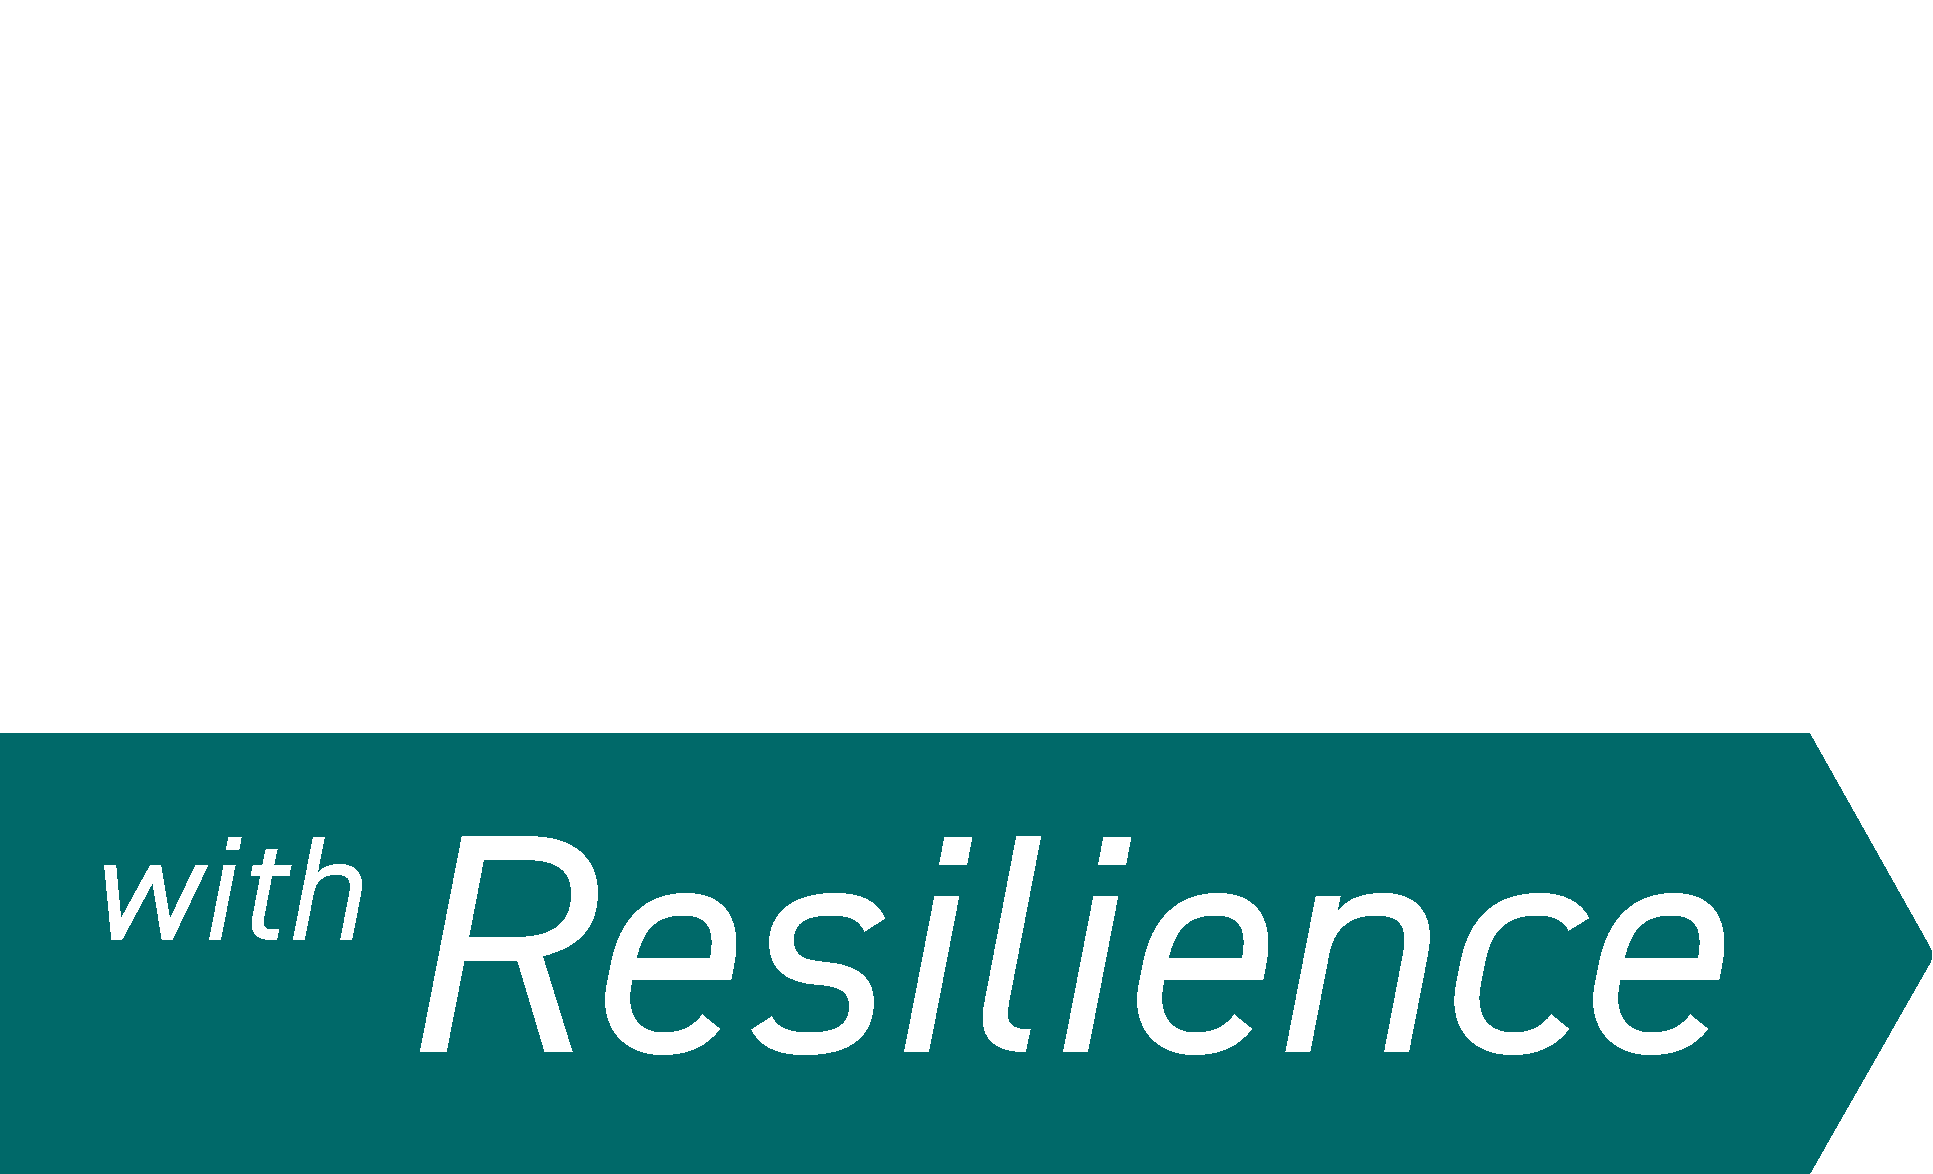 Moving-Forward-with-Resilience-White-Text.png